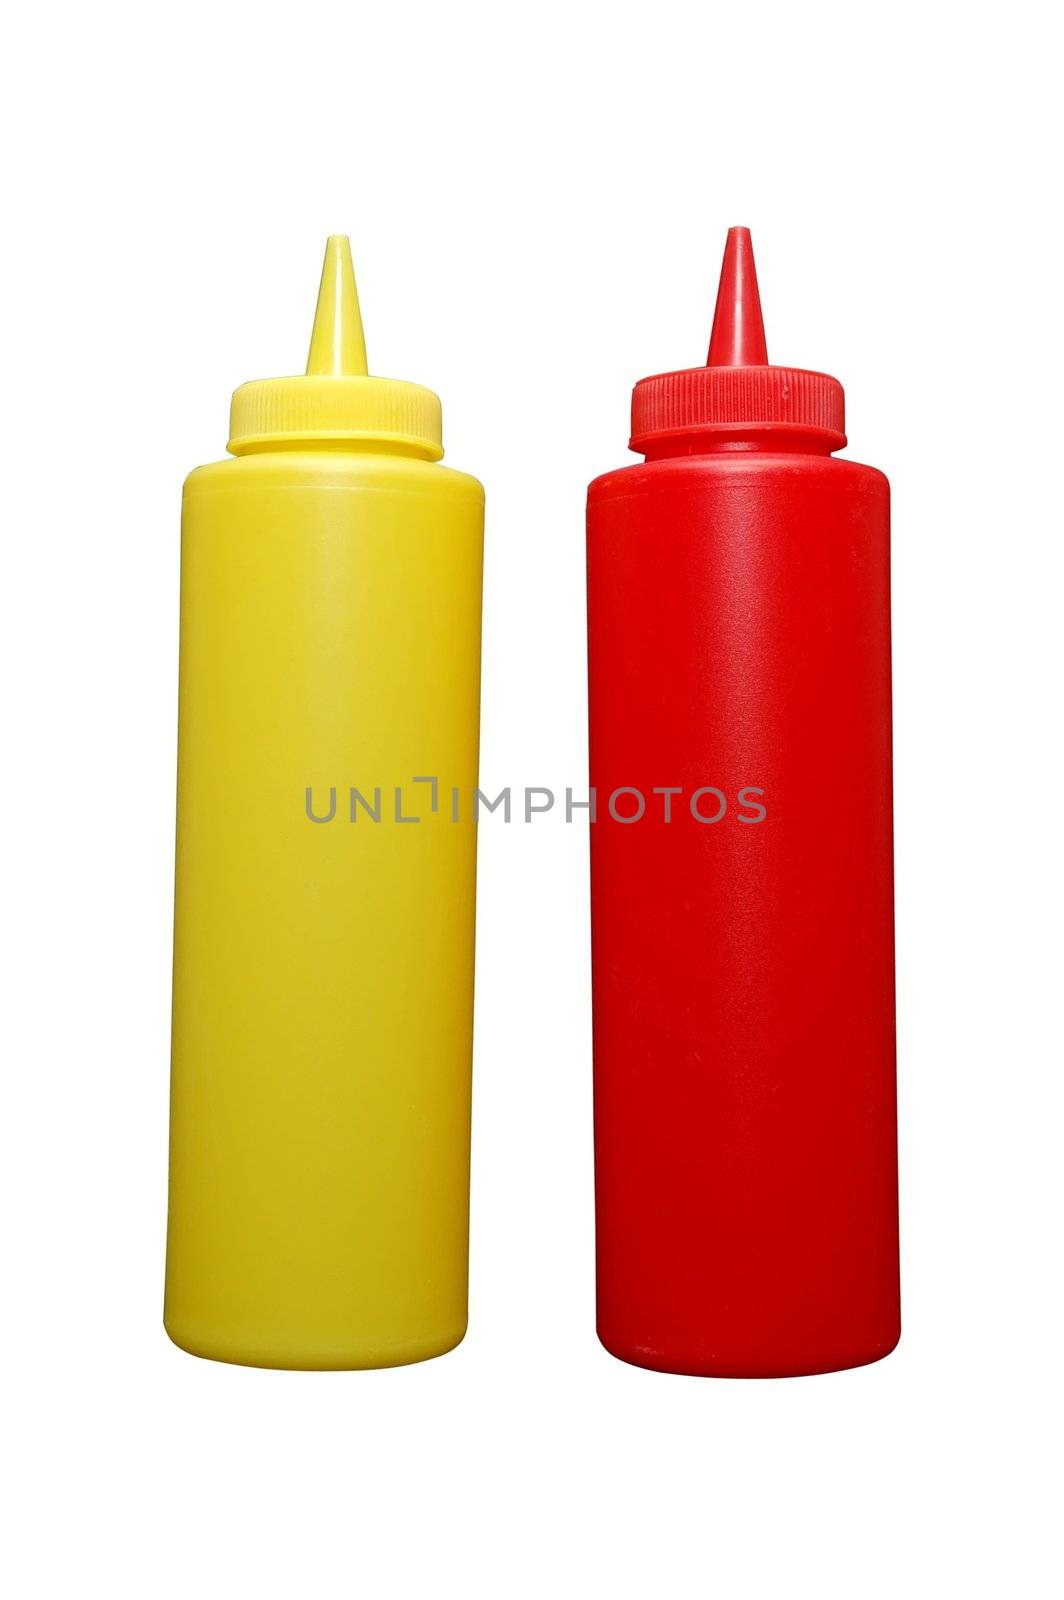 Ketchup and mustard bottles with clipping path.